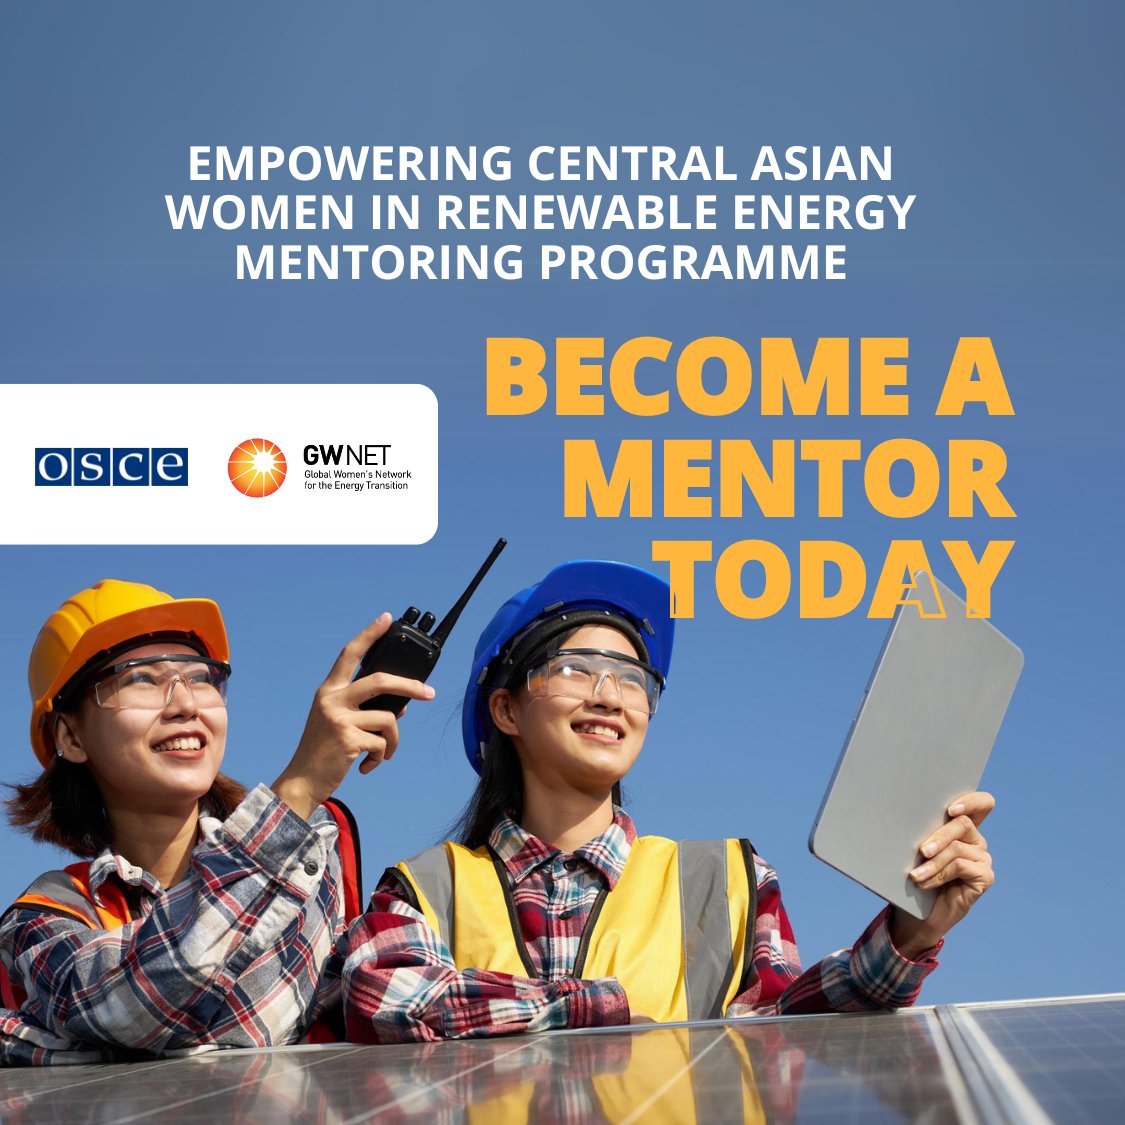 Are you a senior professional interested in supporting the development of upcoming women in the energy transition? We are looking for mentors for the #EmpoweringCentralAsianWomen mentoring program organized by OSCE & @GlobalWomensNet! Read more 👉 bit.ly/3we4VGG